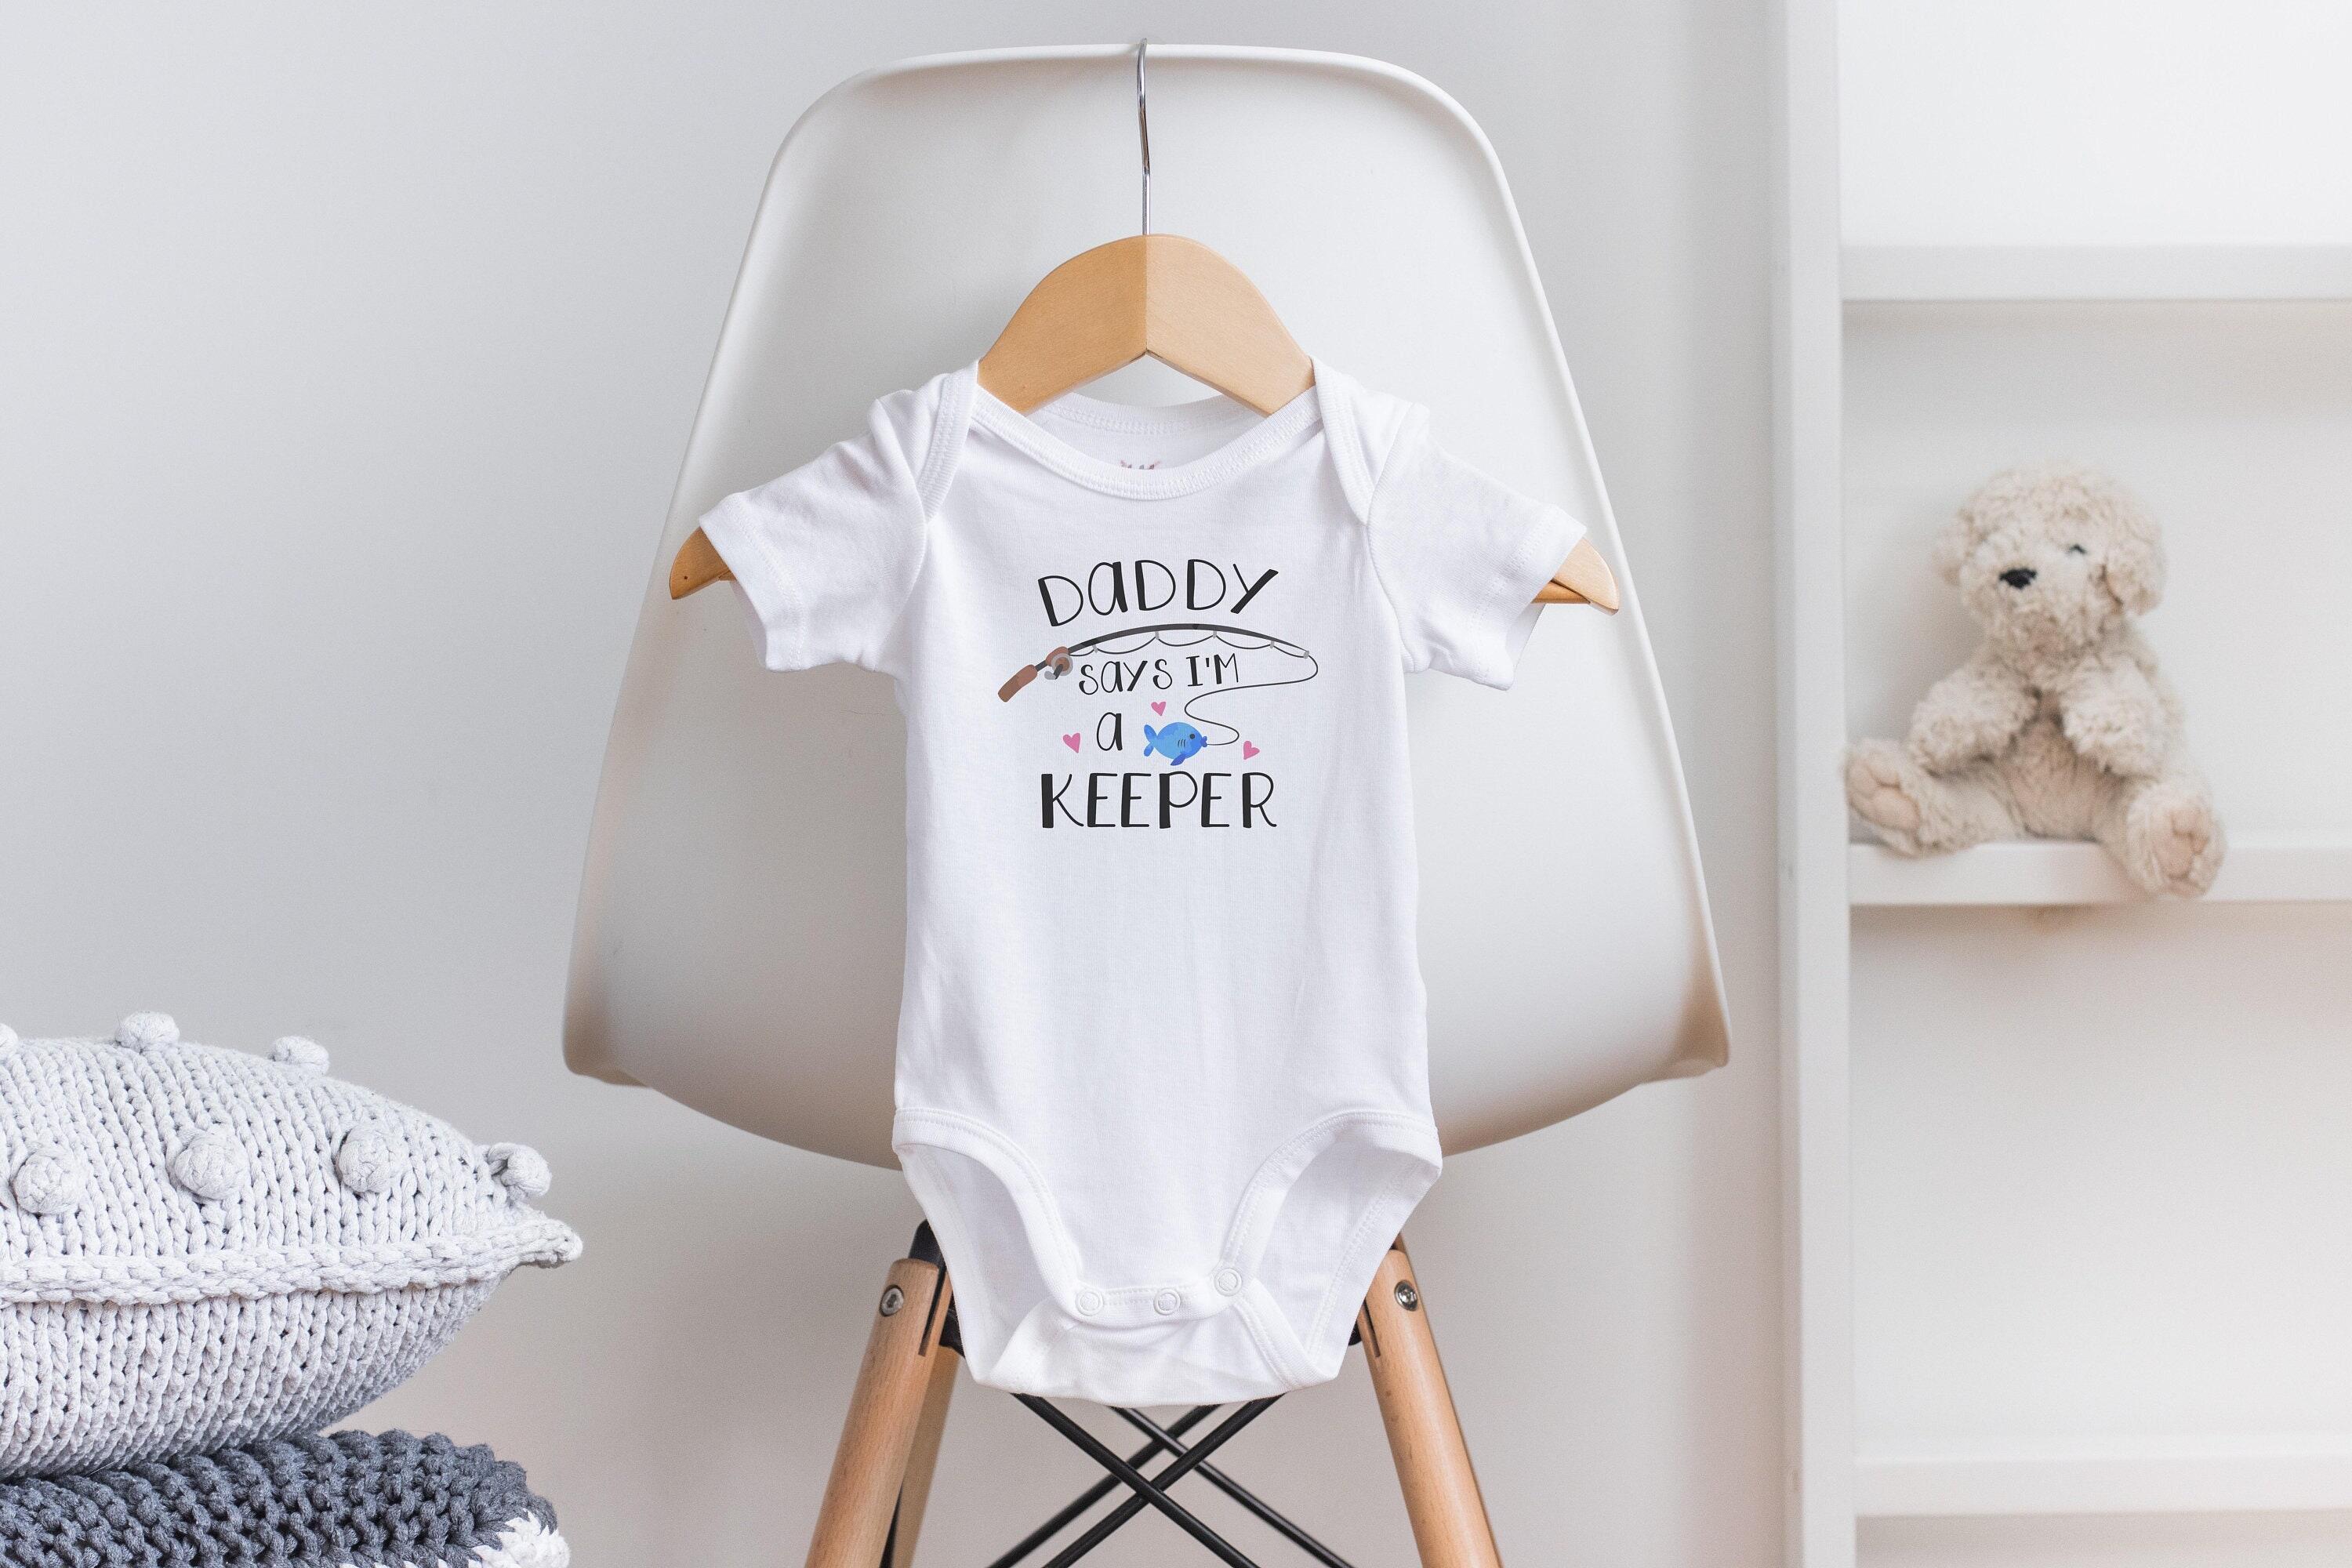 Clothing & Accessories :: Kids & Baby :: Baby Clothing :: Daddy